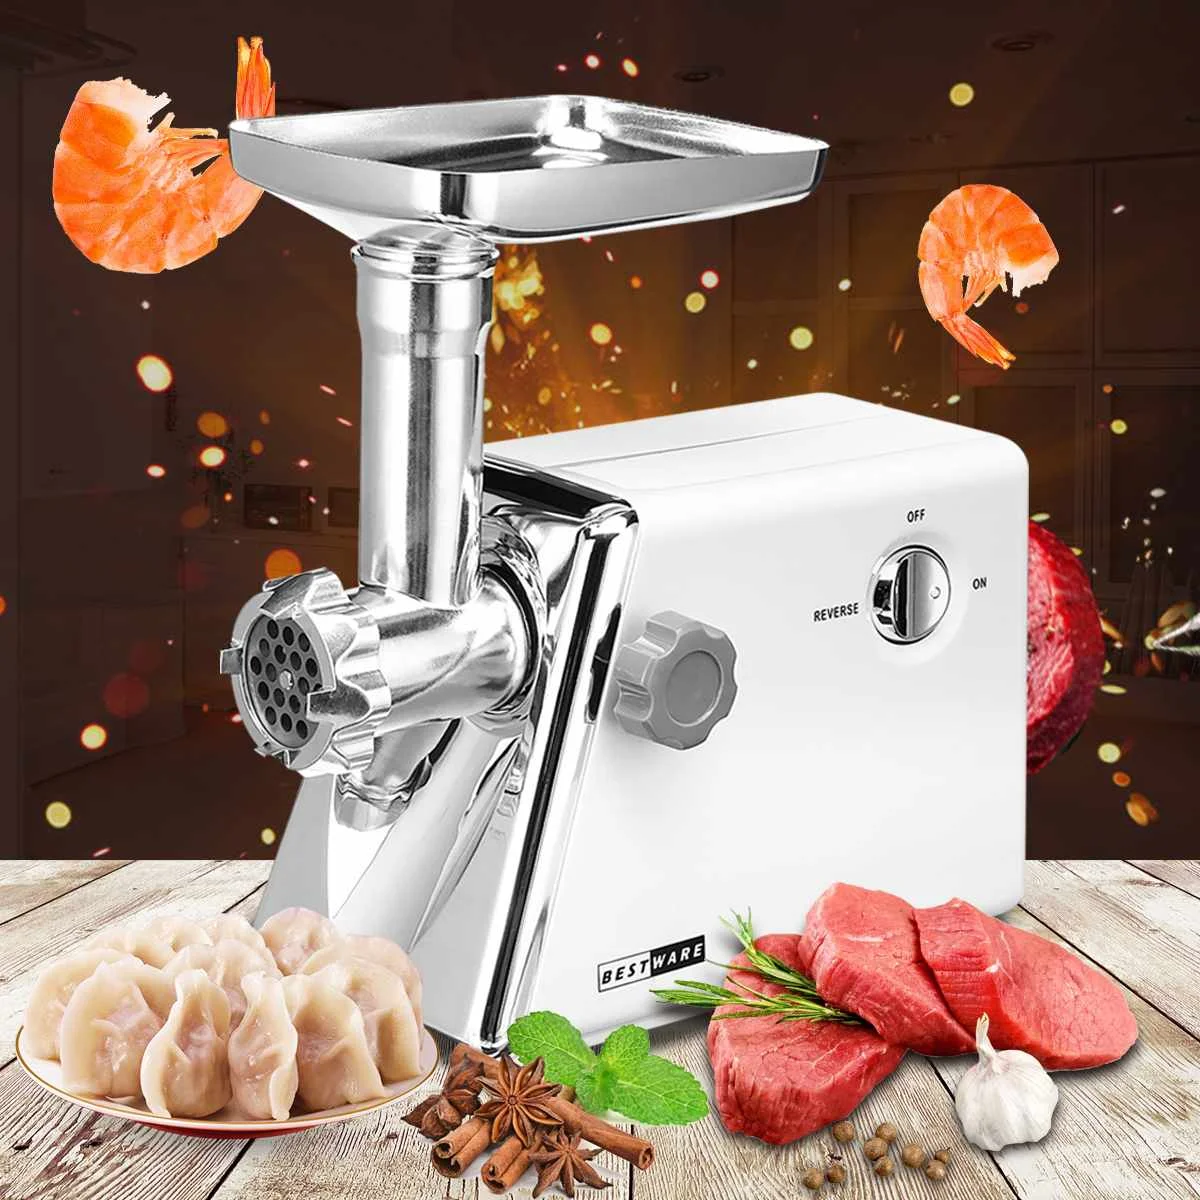 Heavy Duty 2800W Commercial Electric Meat Grinder Mincer Sausage Maker w/ Blades 